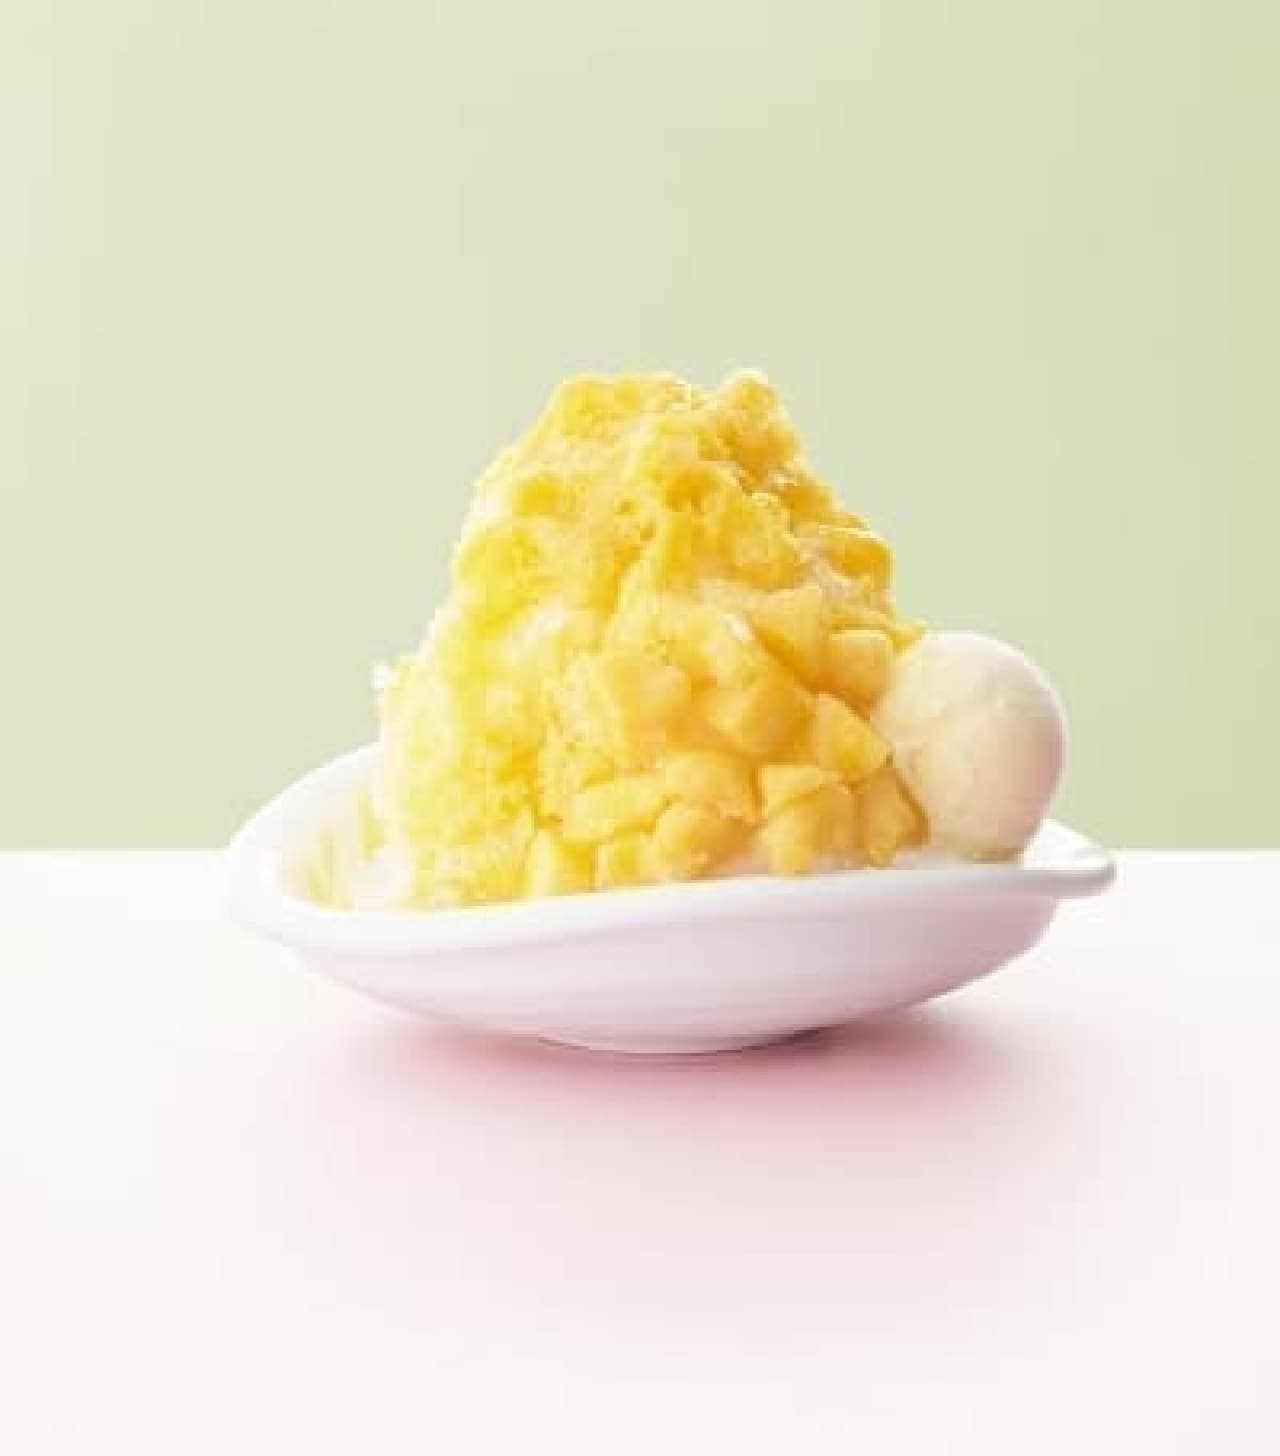 Coco's "Mango's Fluffy Shaved Ice"